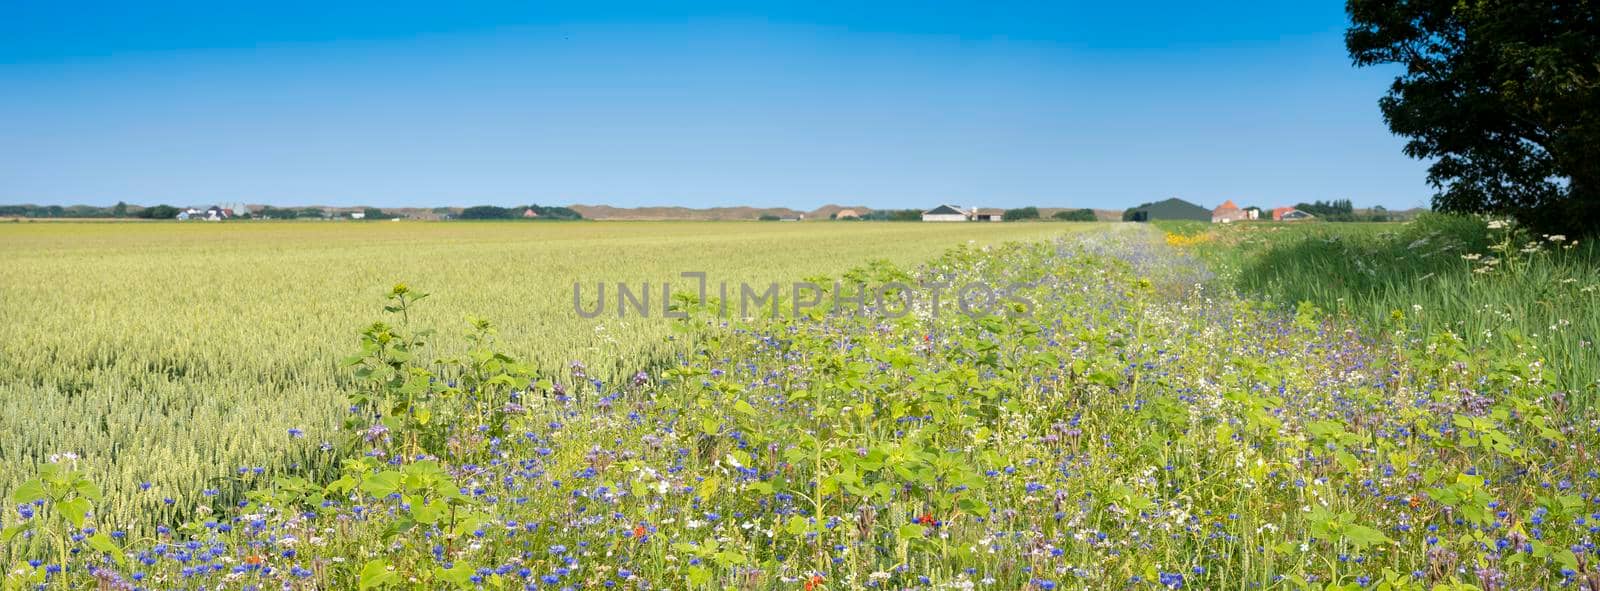 corn field and summer flowers under blue sky on the dutch island of texel under blue summer sky in the netherlands